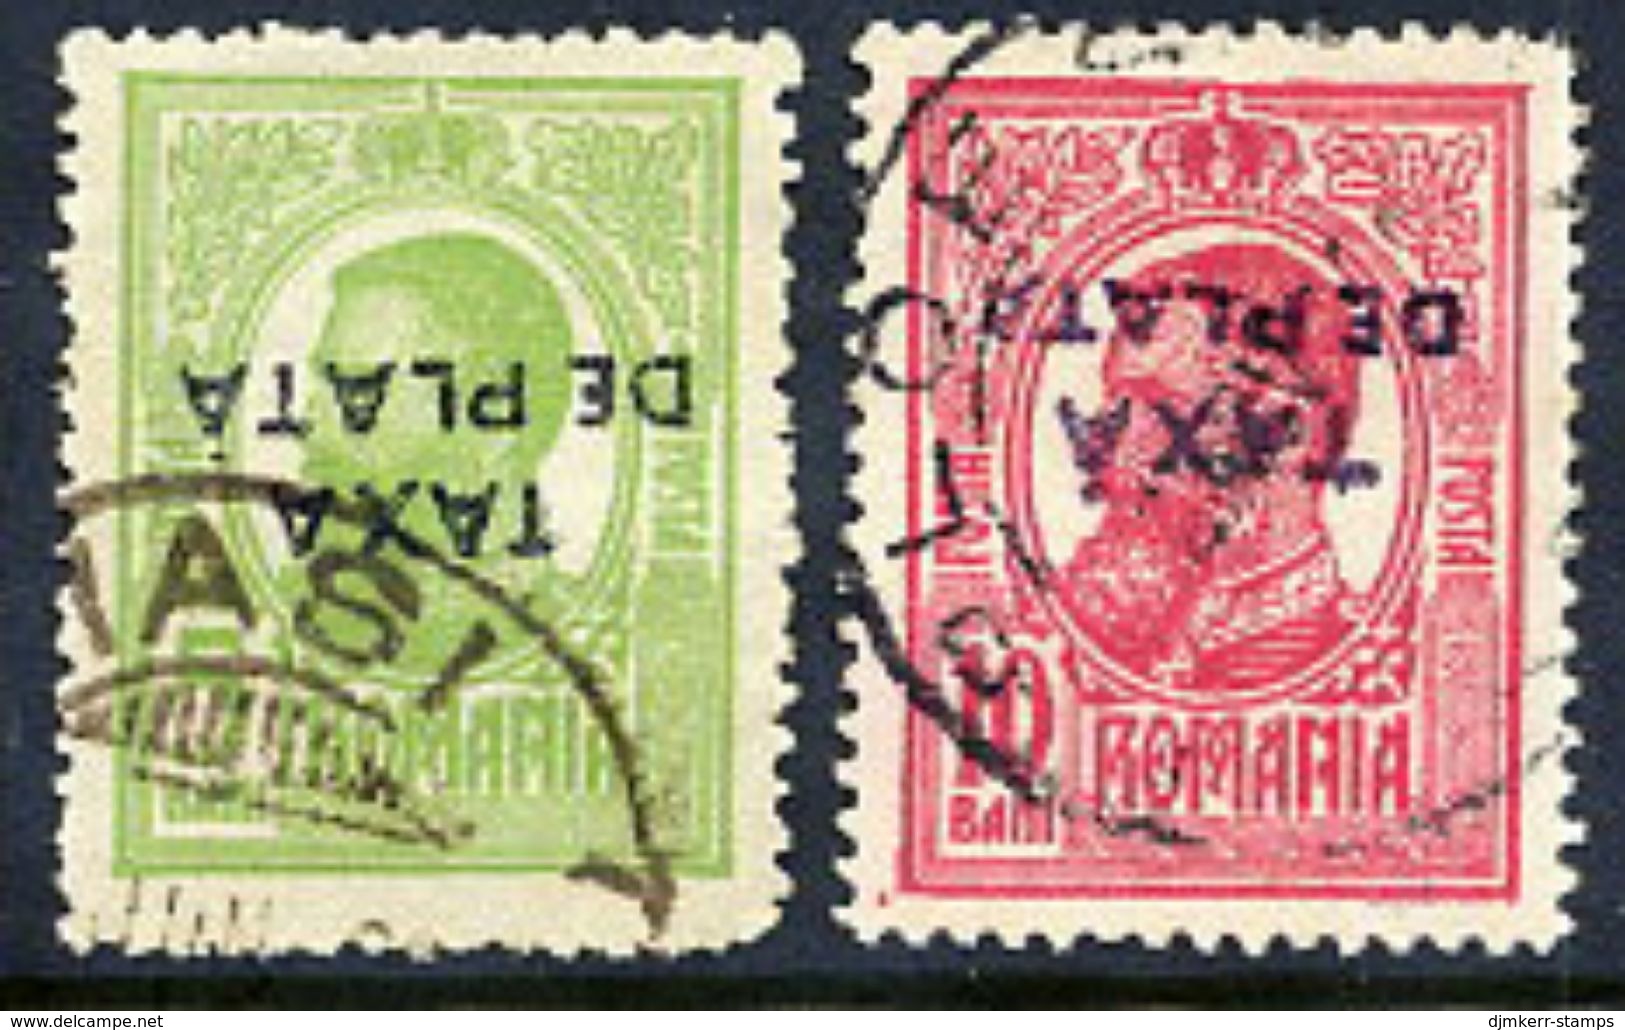 ROMANIA 1918 Postage Due Overprints Inverted, Used.  Michel 40-41 K, SG D675a-76a Cat. £23.75 - Postage Due